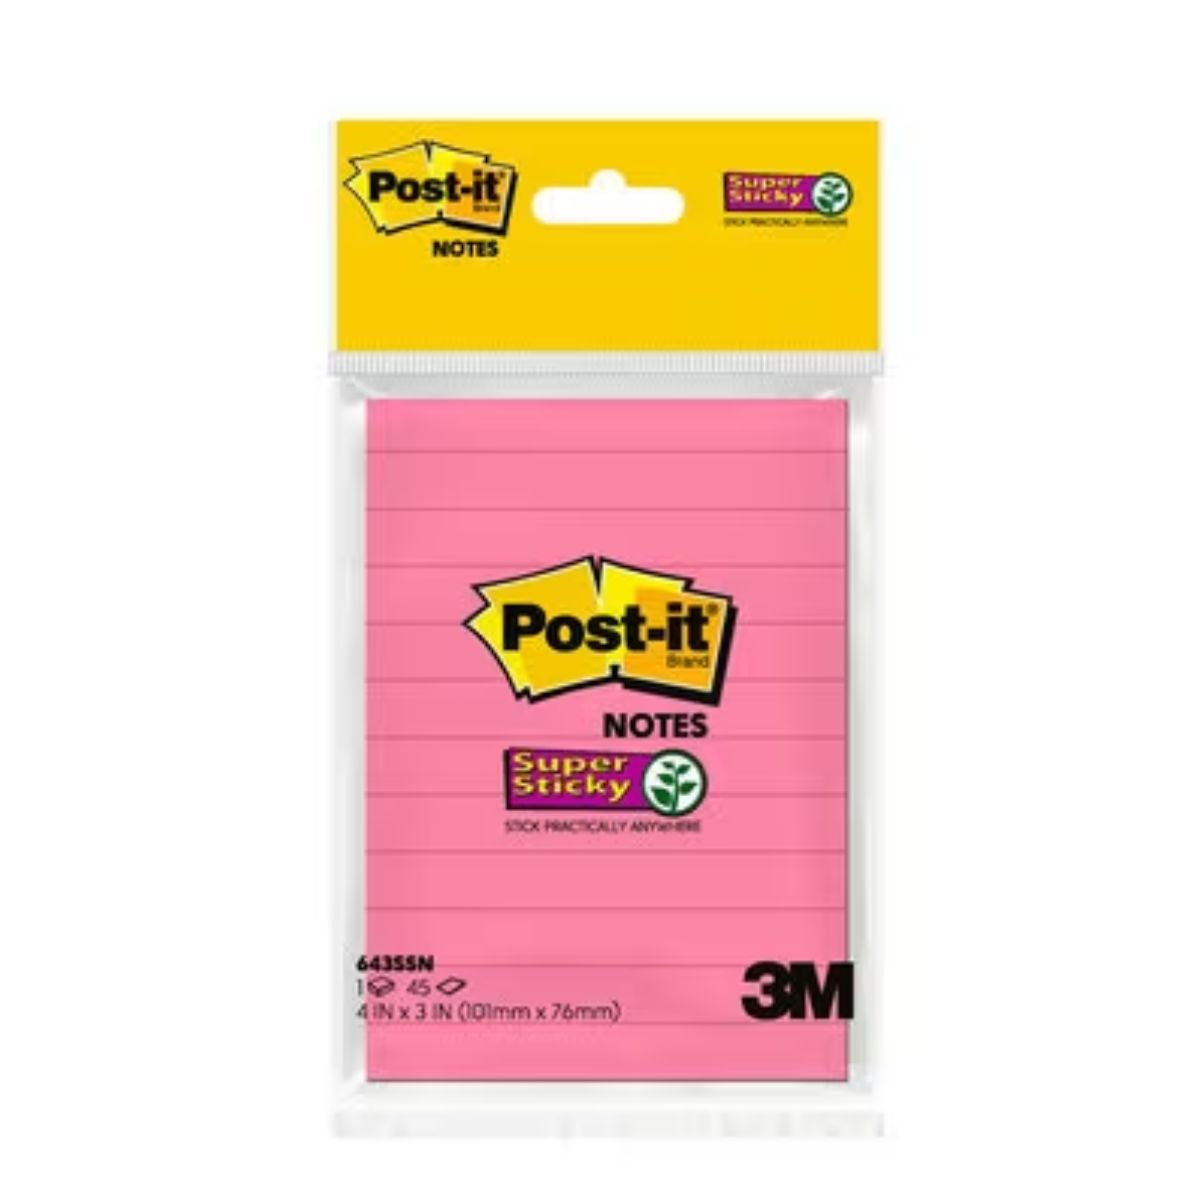 3M Post-it Super Sticky Lined HB Neon Pink, 4in X 3in, 45 Sheets